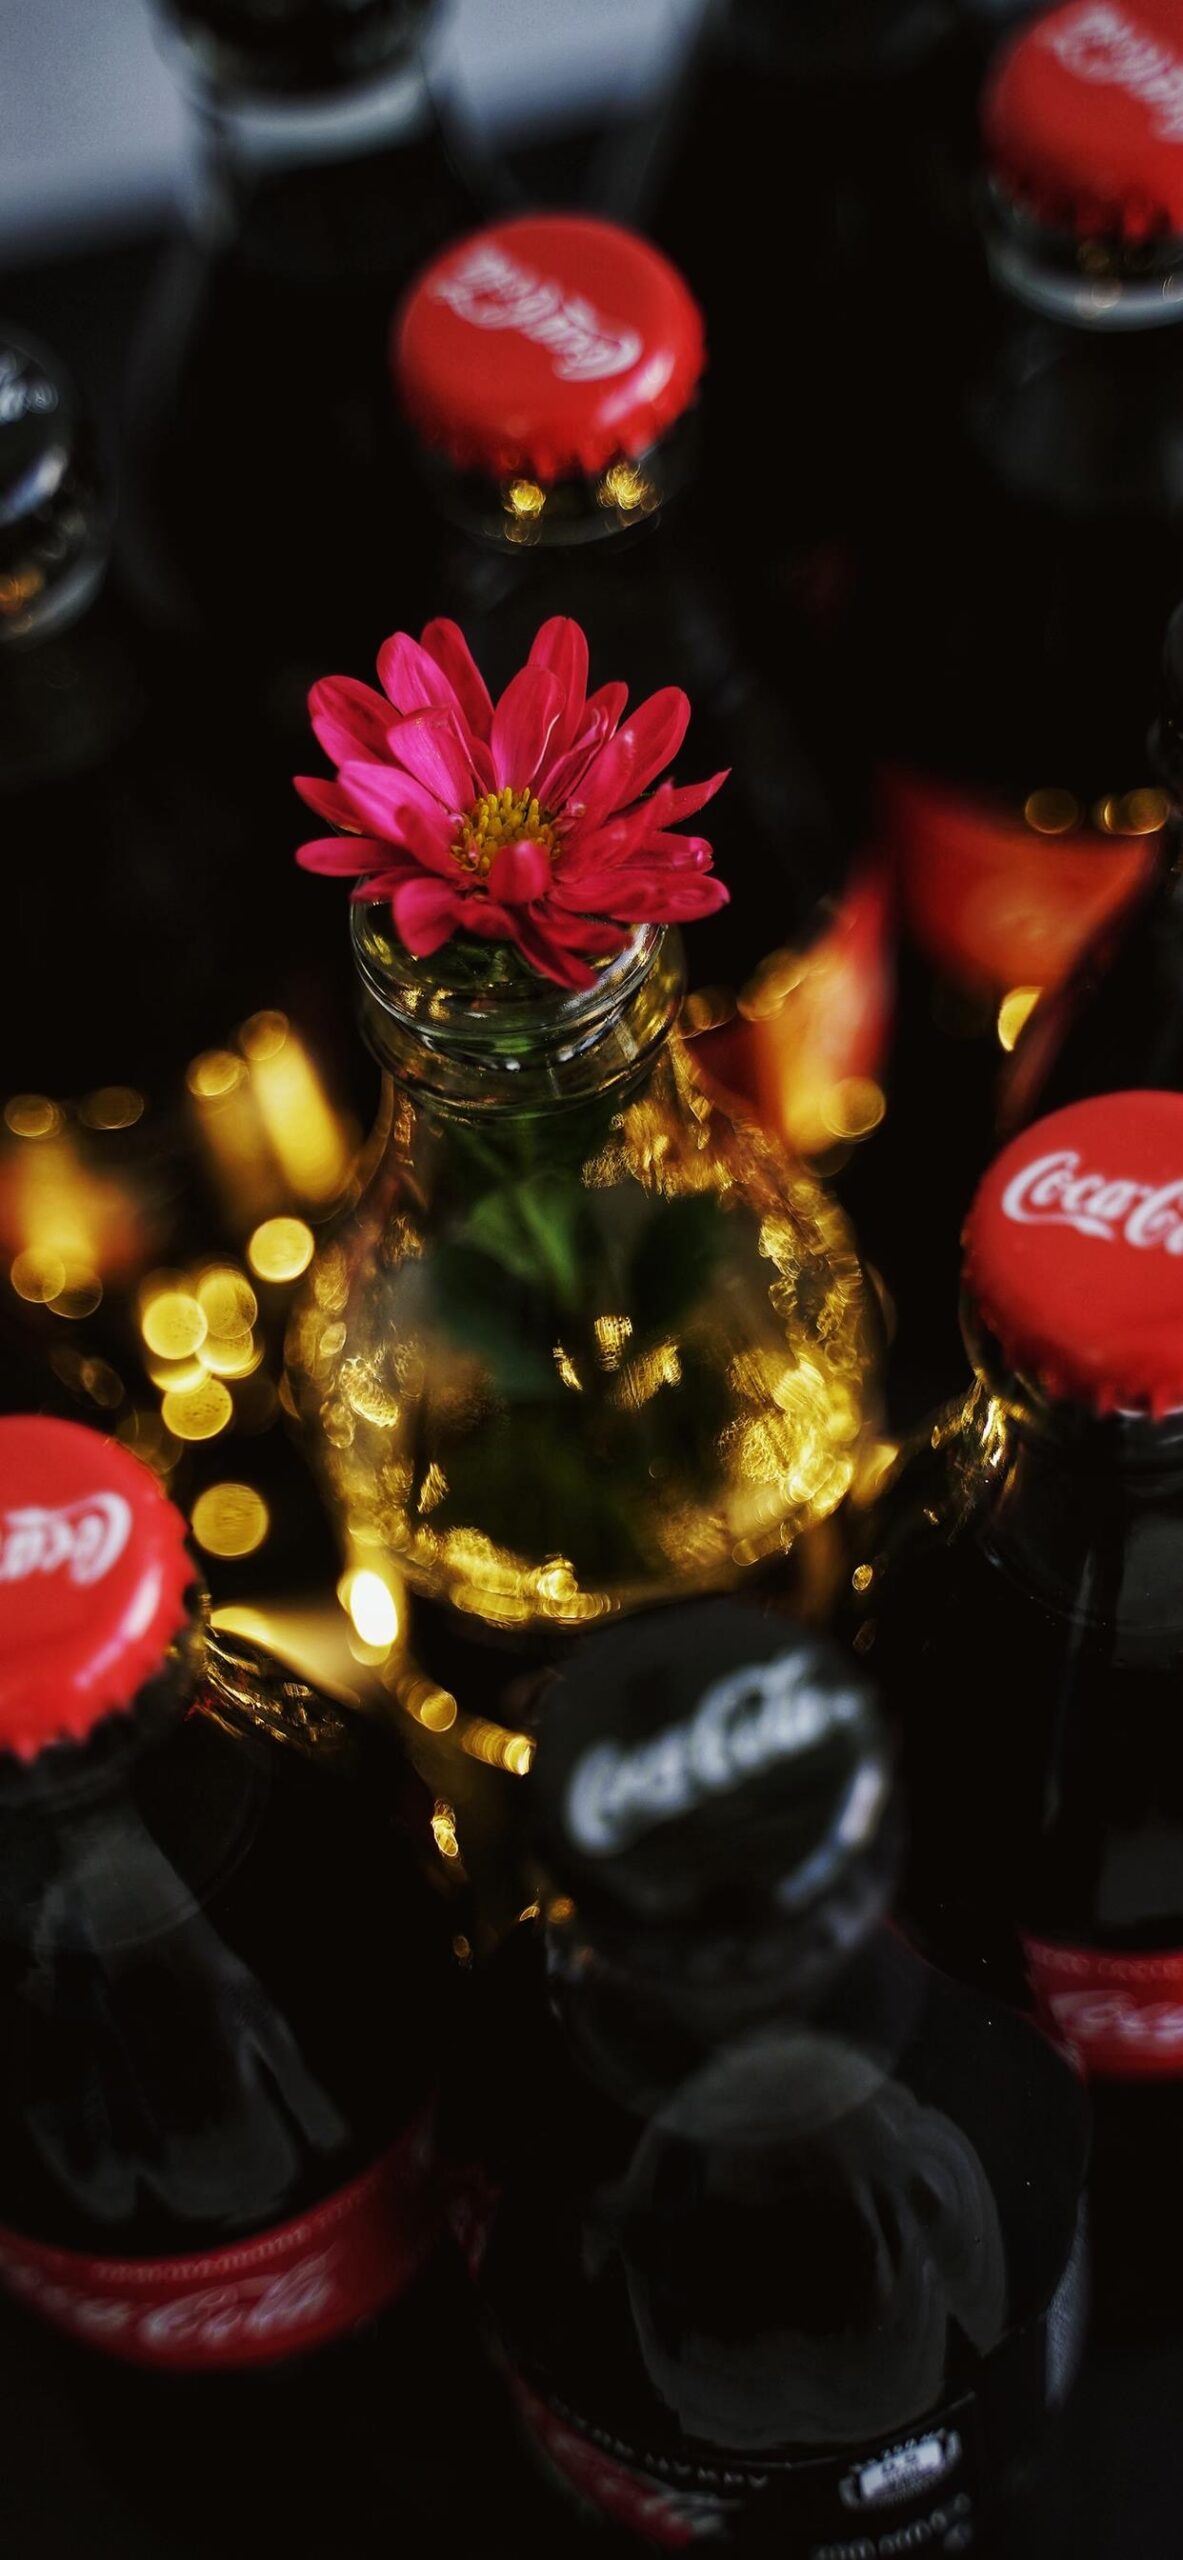 Red Flower and Cola